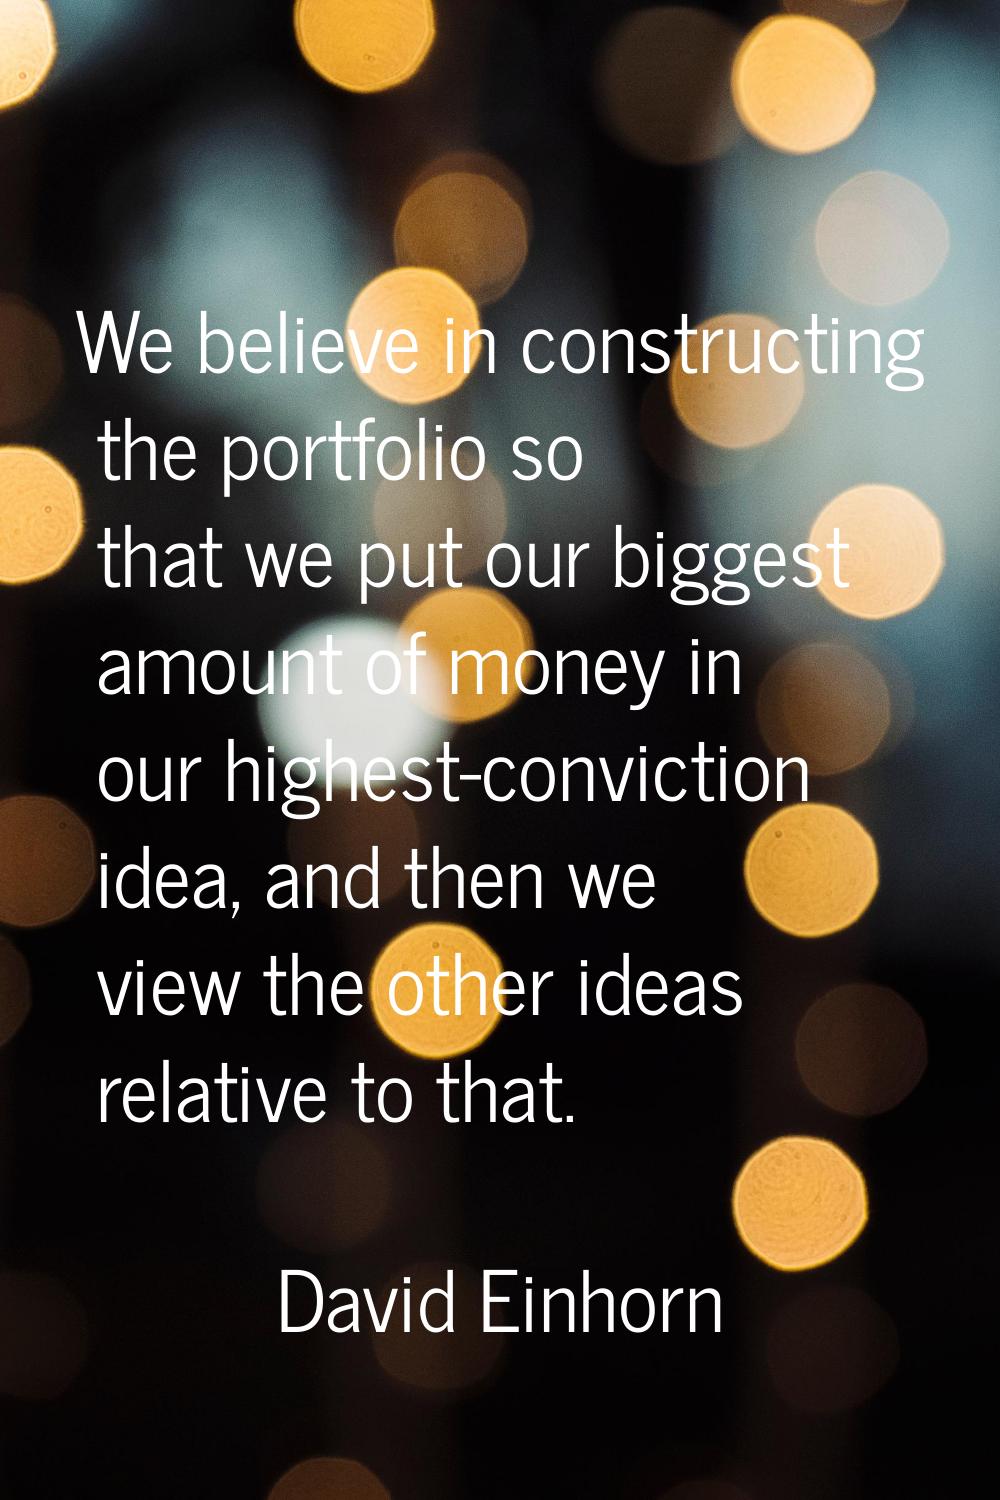 We believe in constructing the portfolio so that we put our biggest amount of money in our highest-